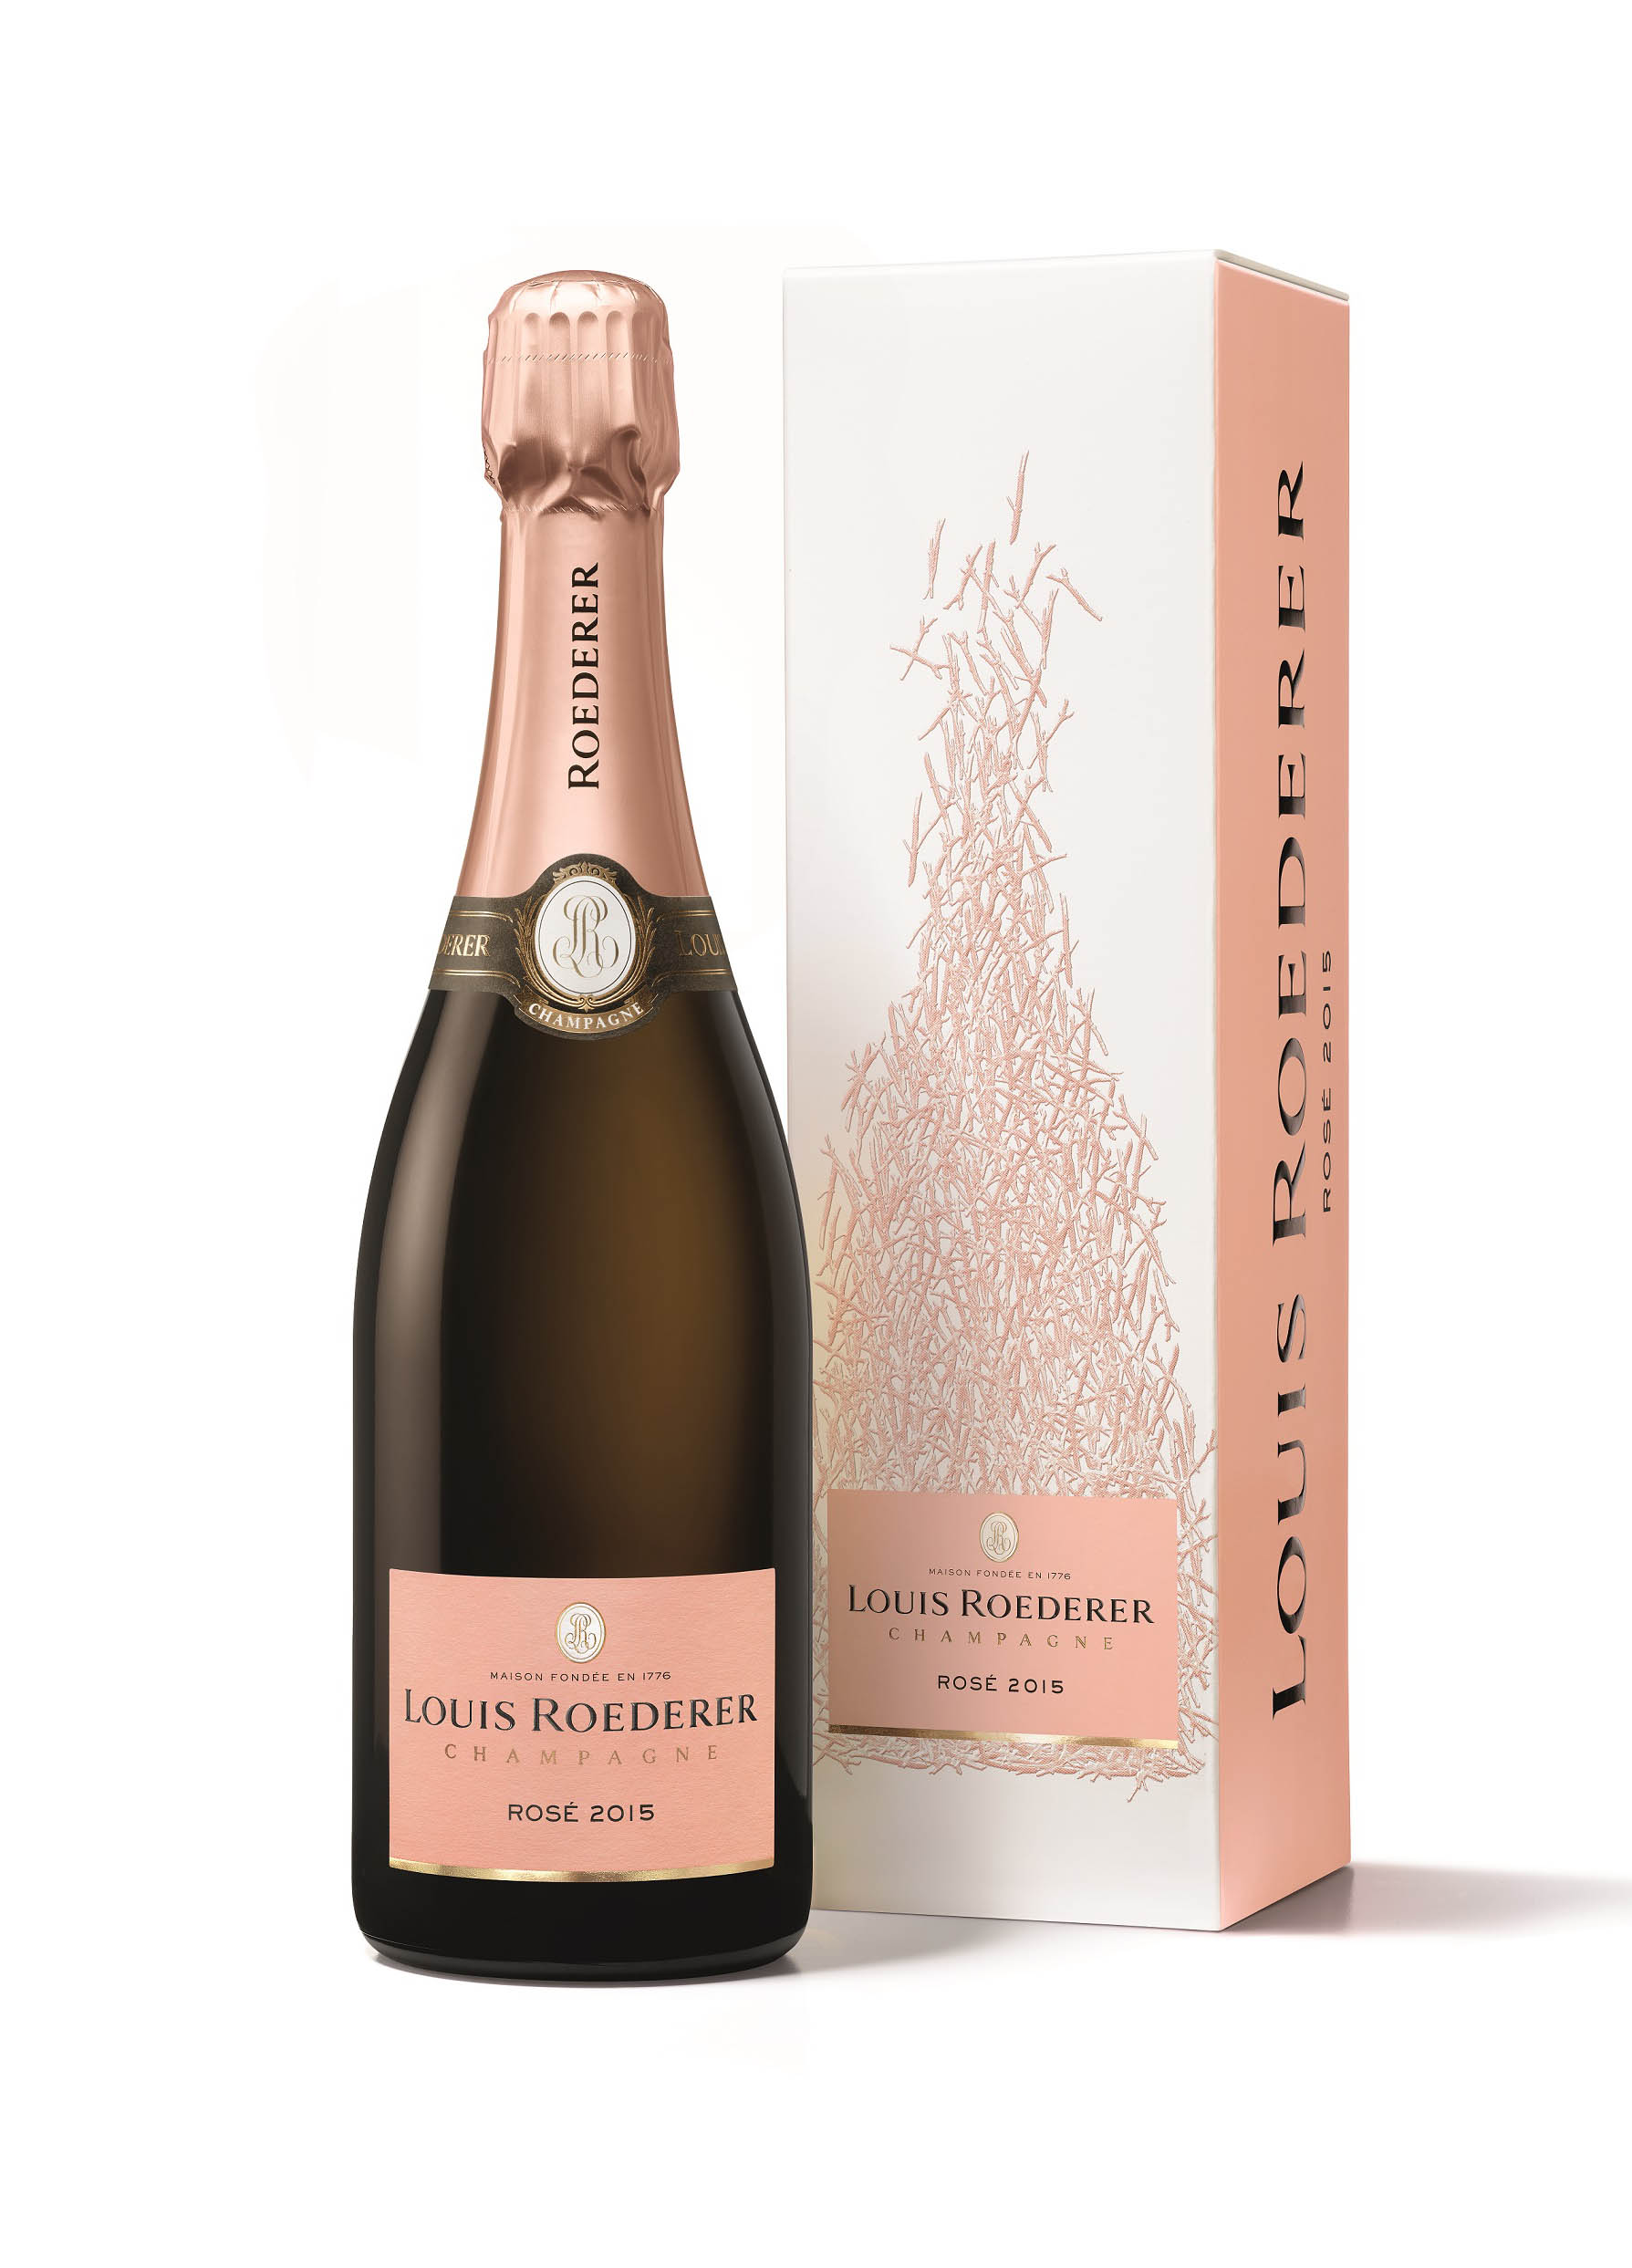 Louis Roederer champagne